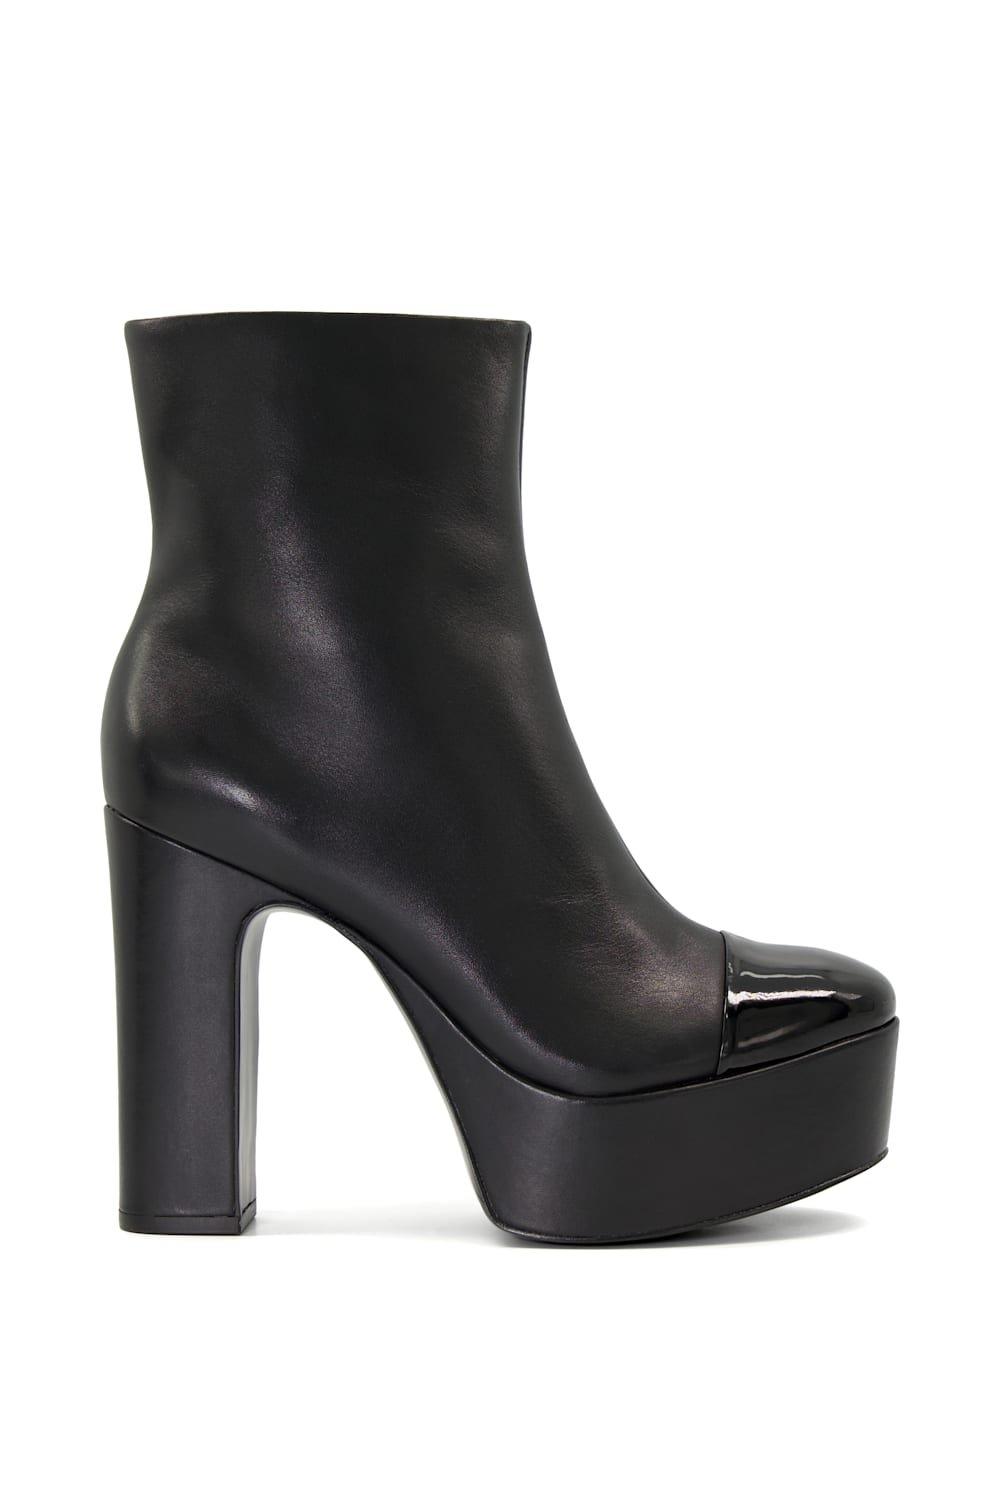 Boots | 'Orline' Leather Ankle Boots | Dune London